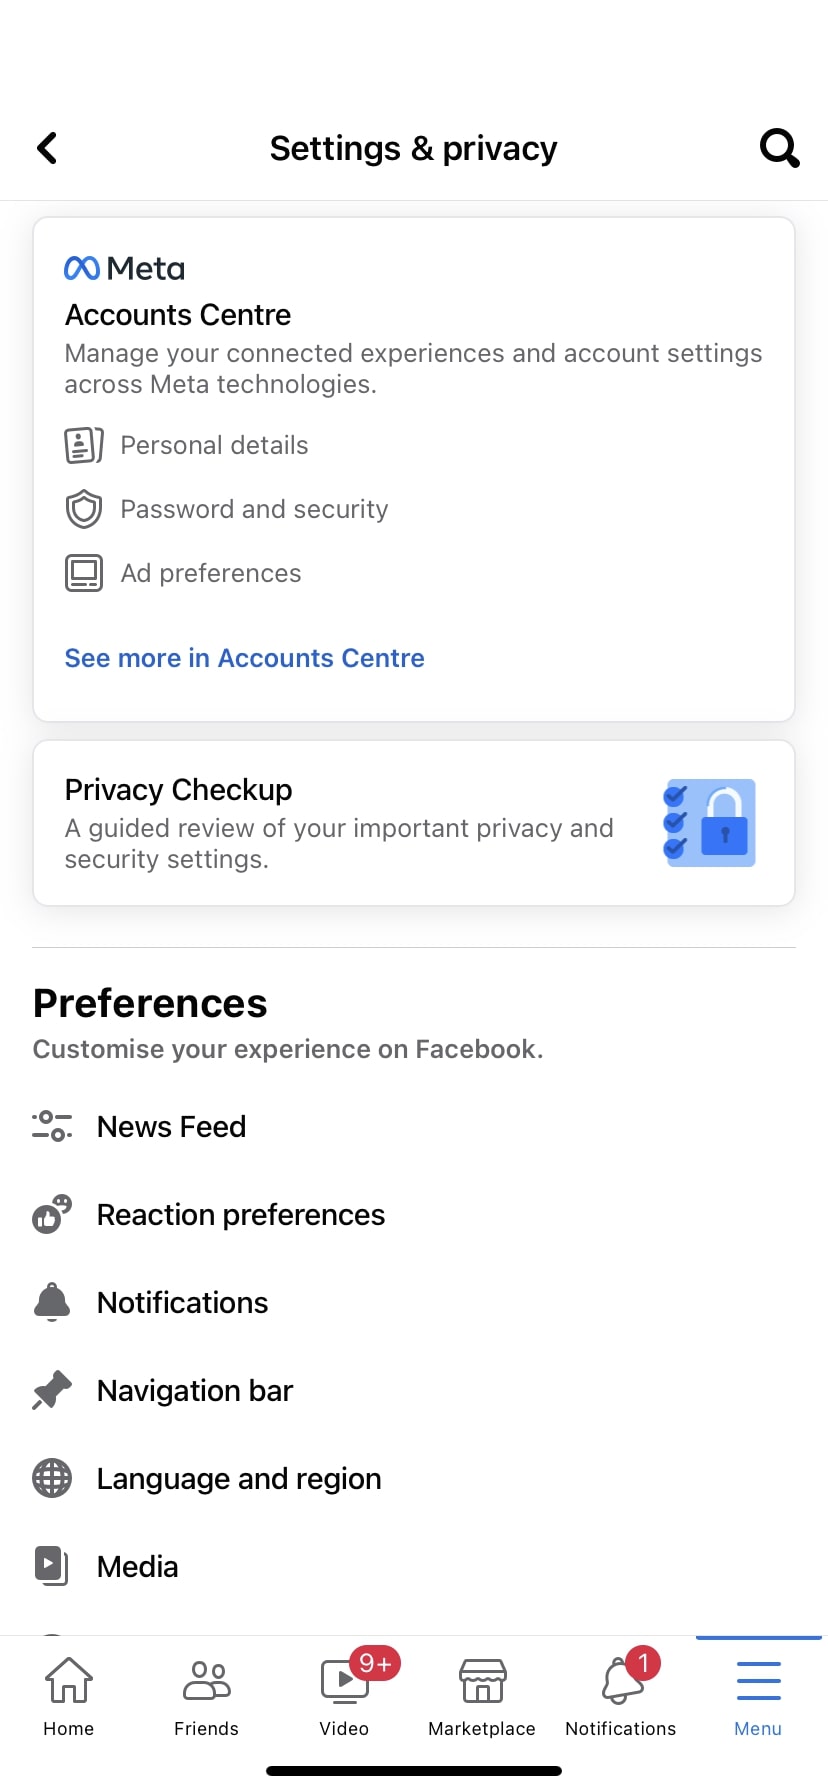 Facebook Meta Accounts Centre section see more in Accounts Centre option